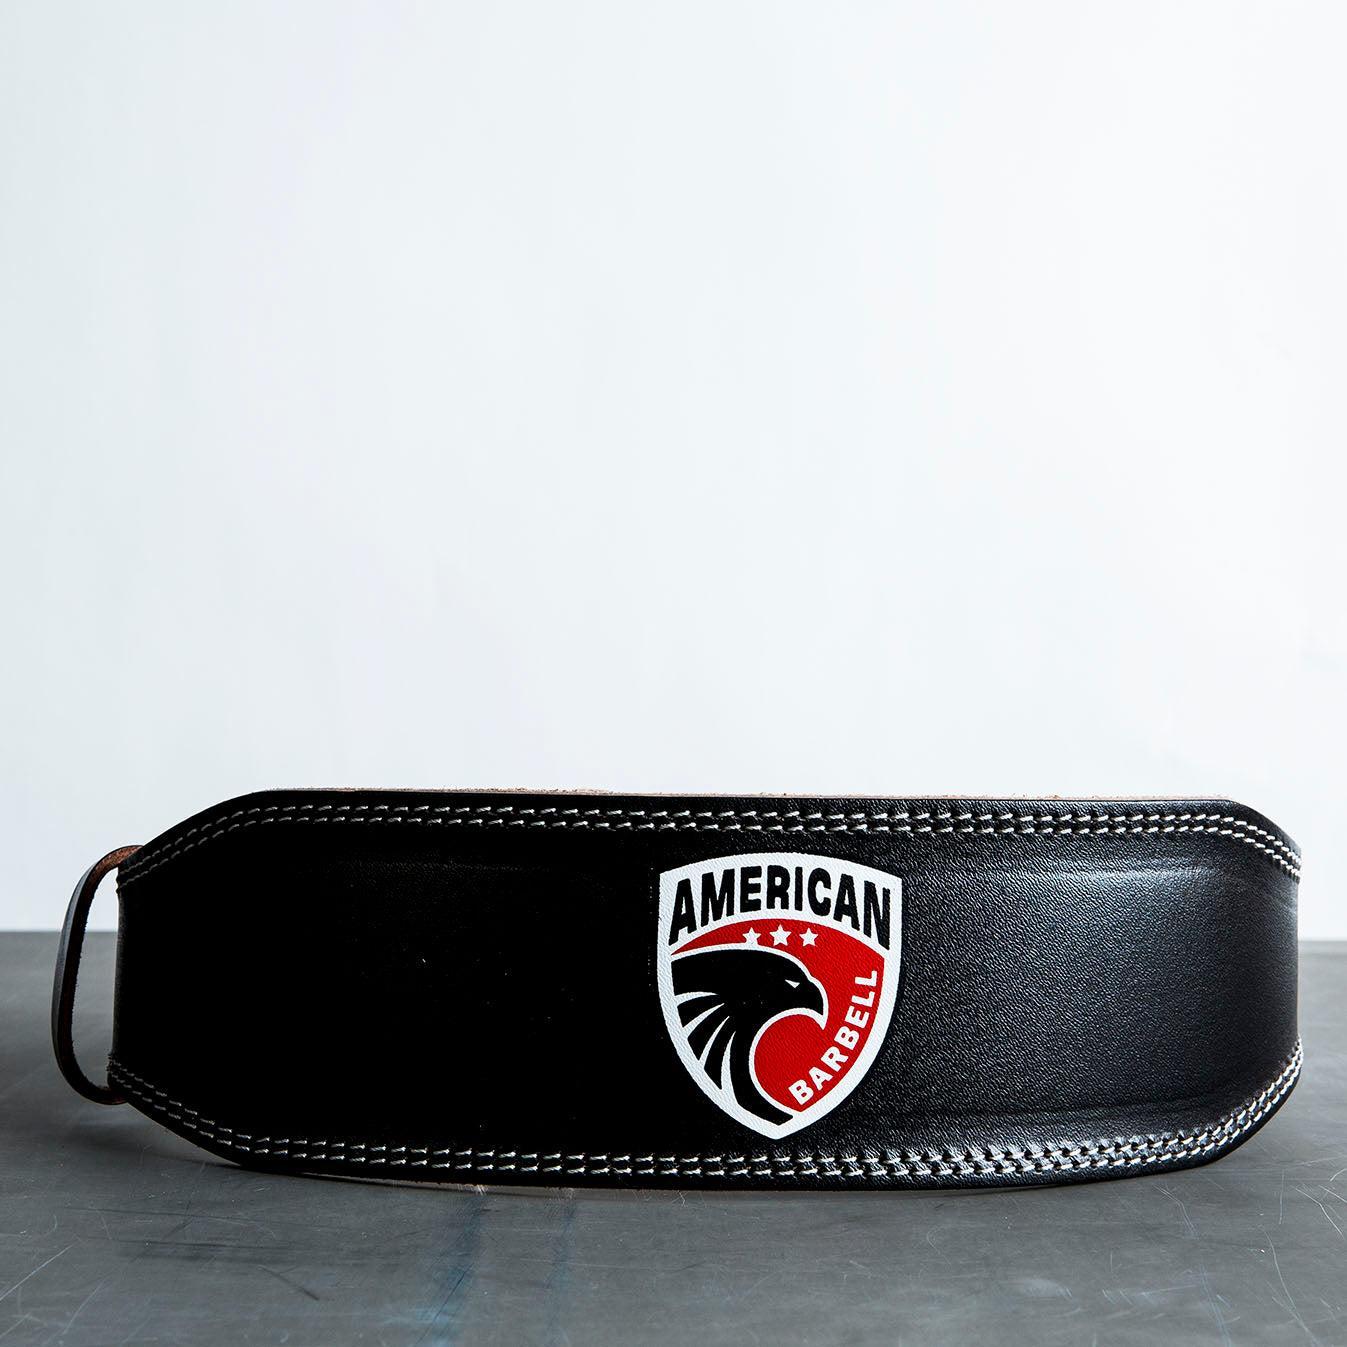 American Barbell Leather Contoured Weight Belt